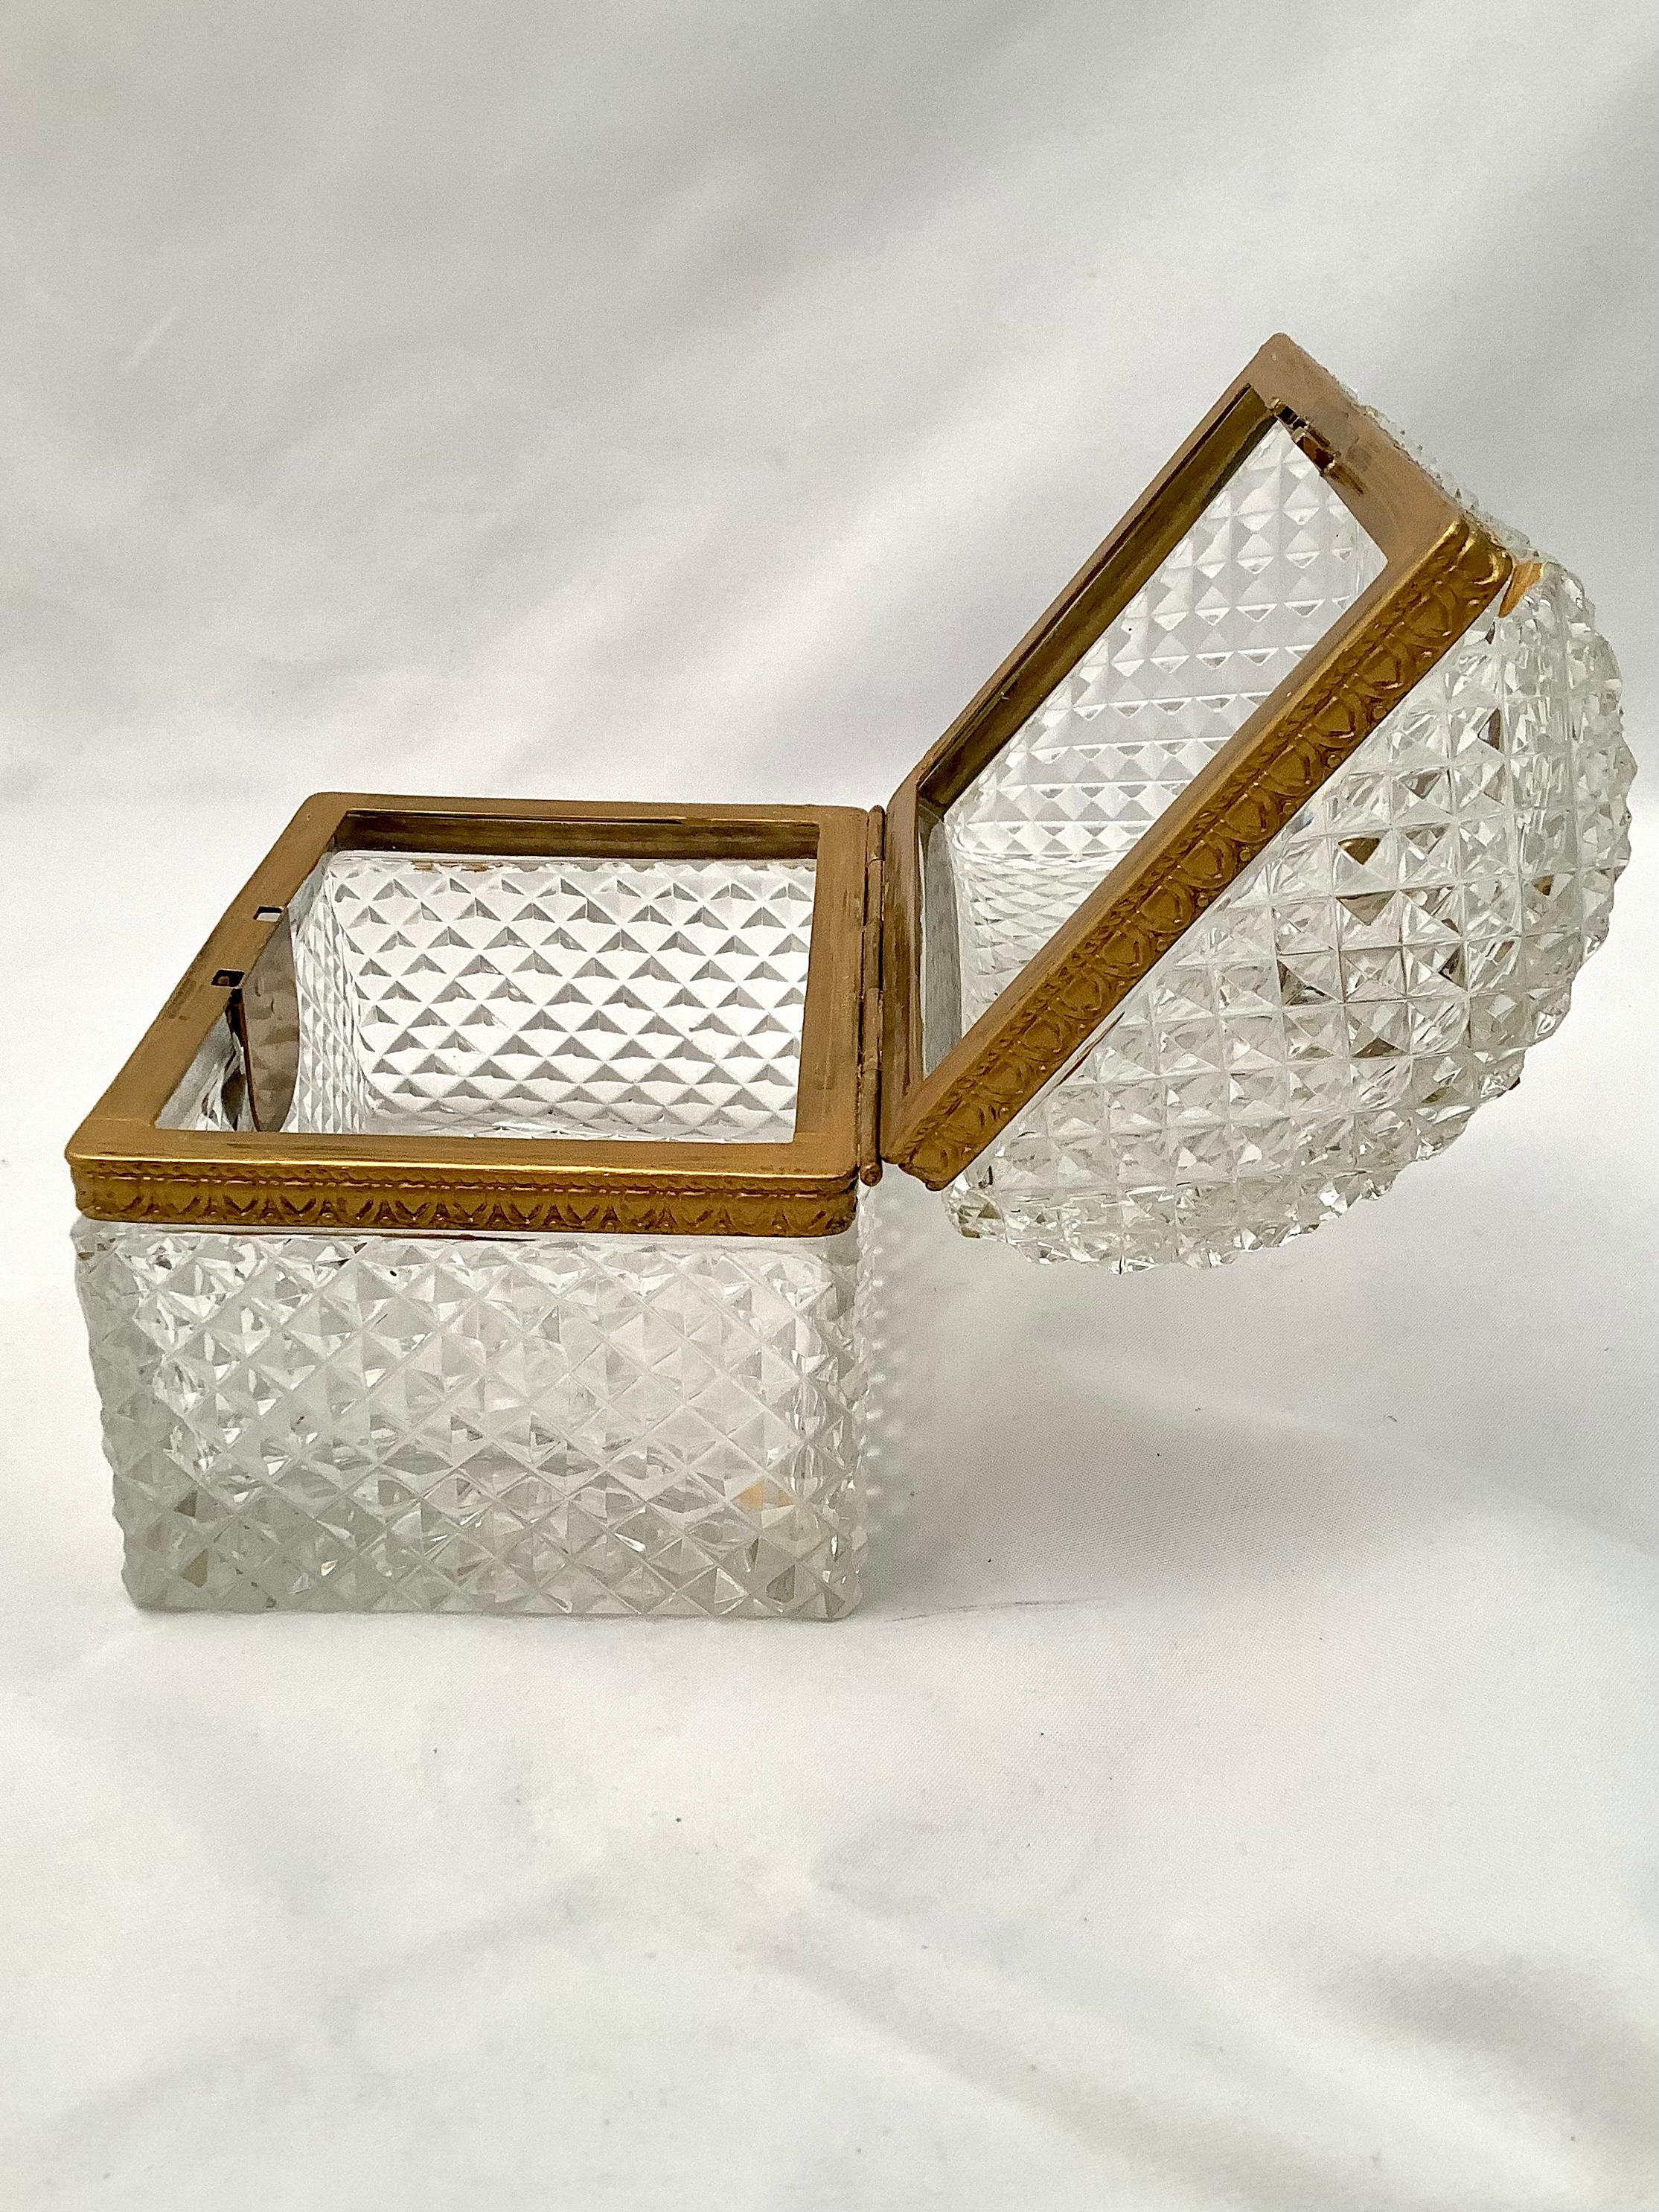 Early 20th century French cut crystal & brass dome shaped box with handle and key hole. Star pattern on bottom.